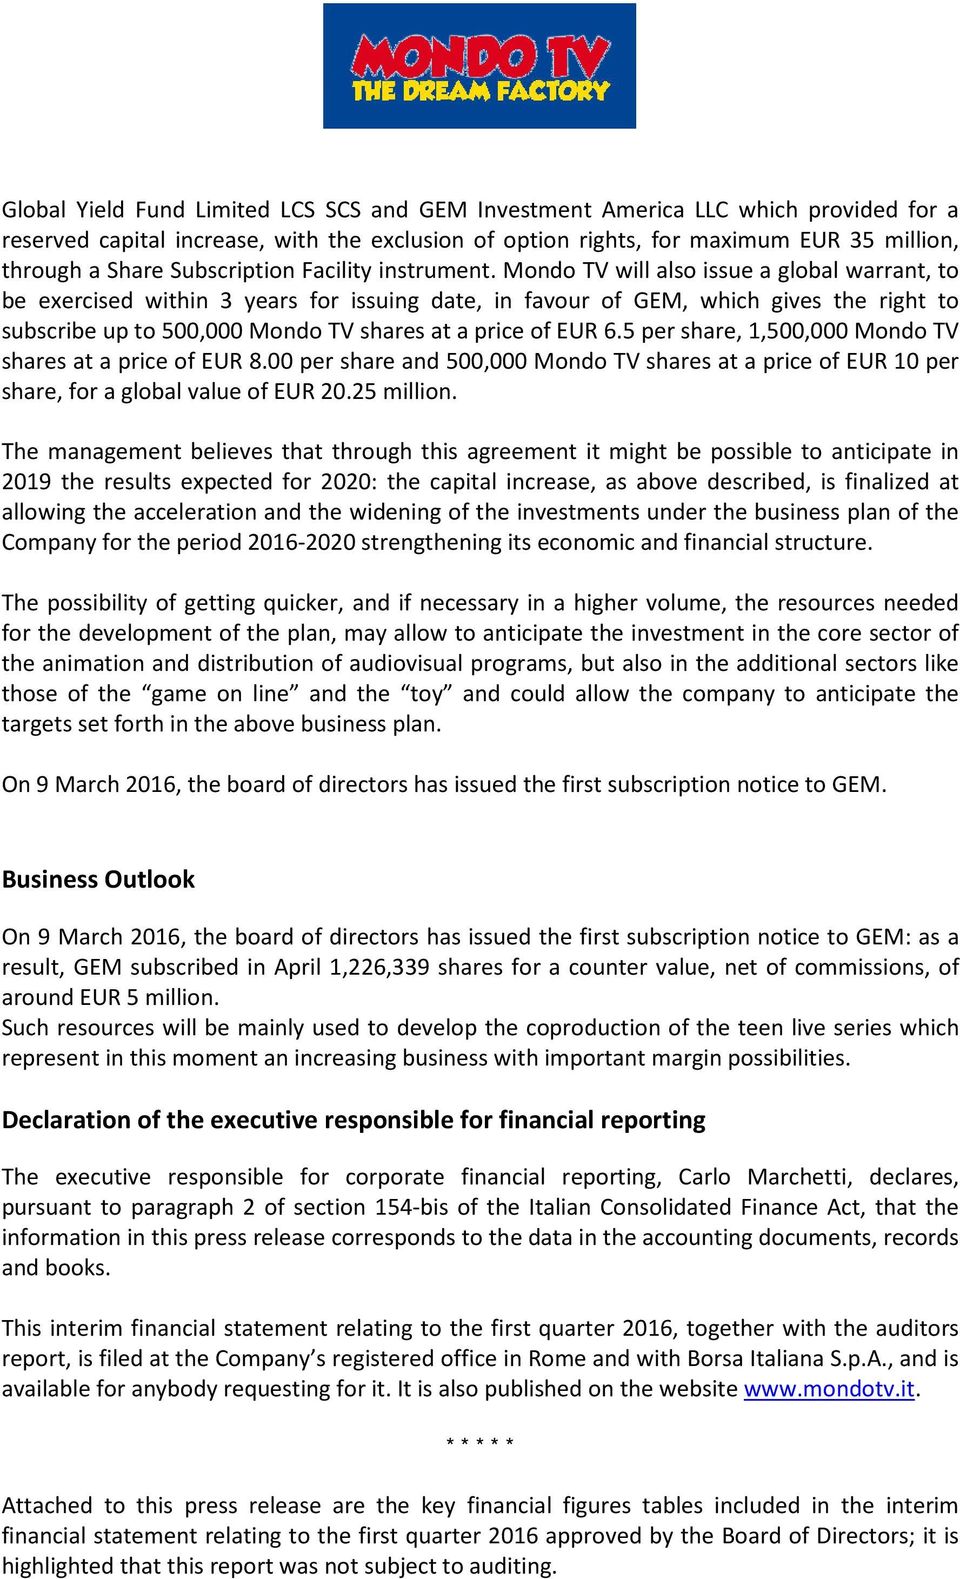 Mondo TV will also issue a global warrant, to be exercised within 3 years for issuing date, in favour of GEM, which gives the right to subscribe up to 500,000 Mondo TV shares at a price of EUR 6.